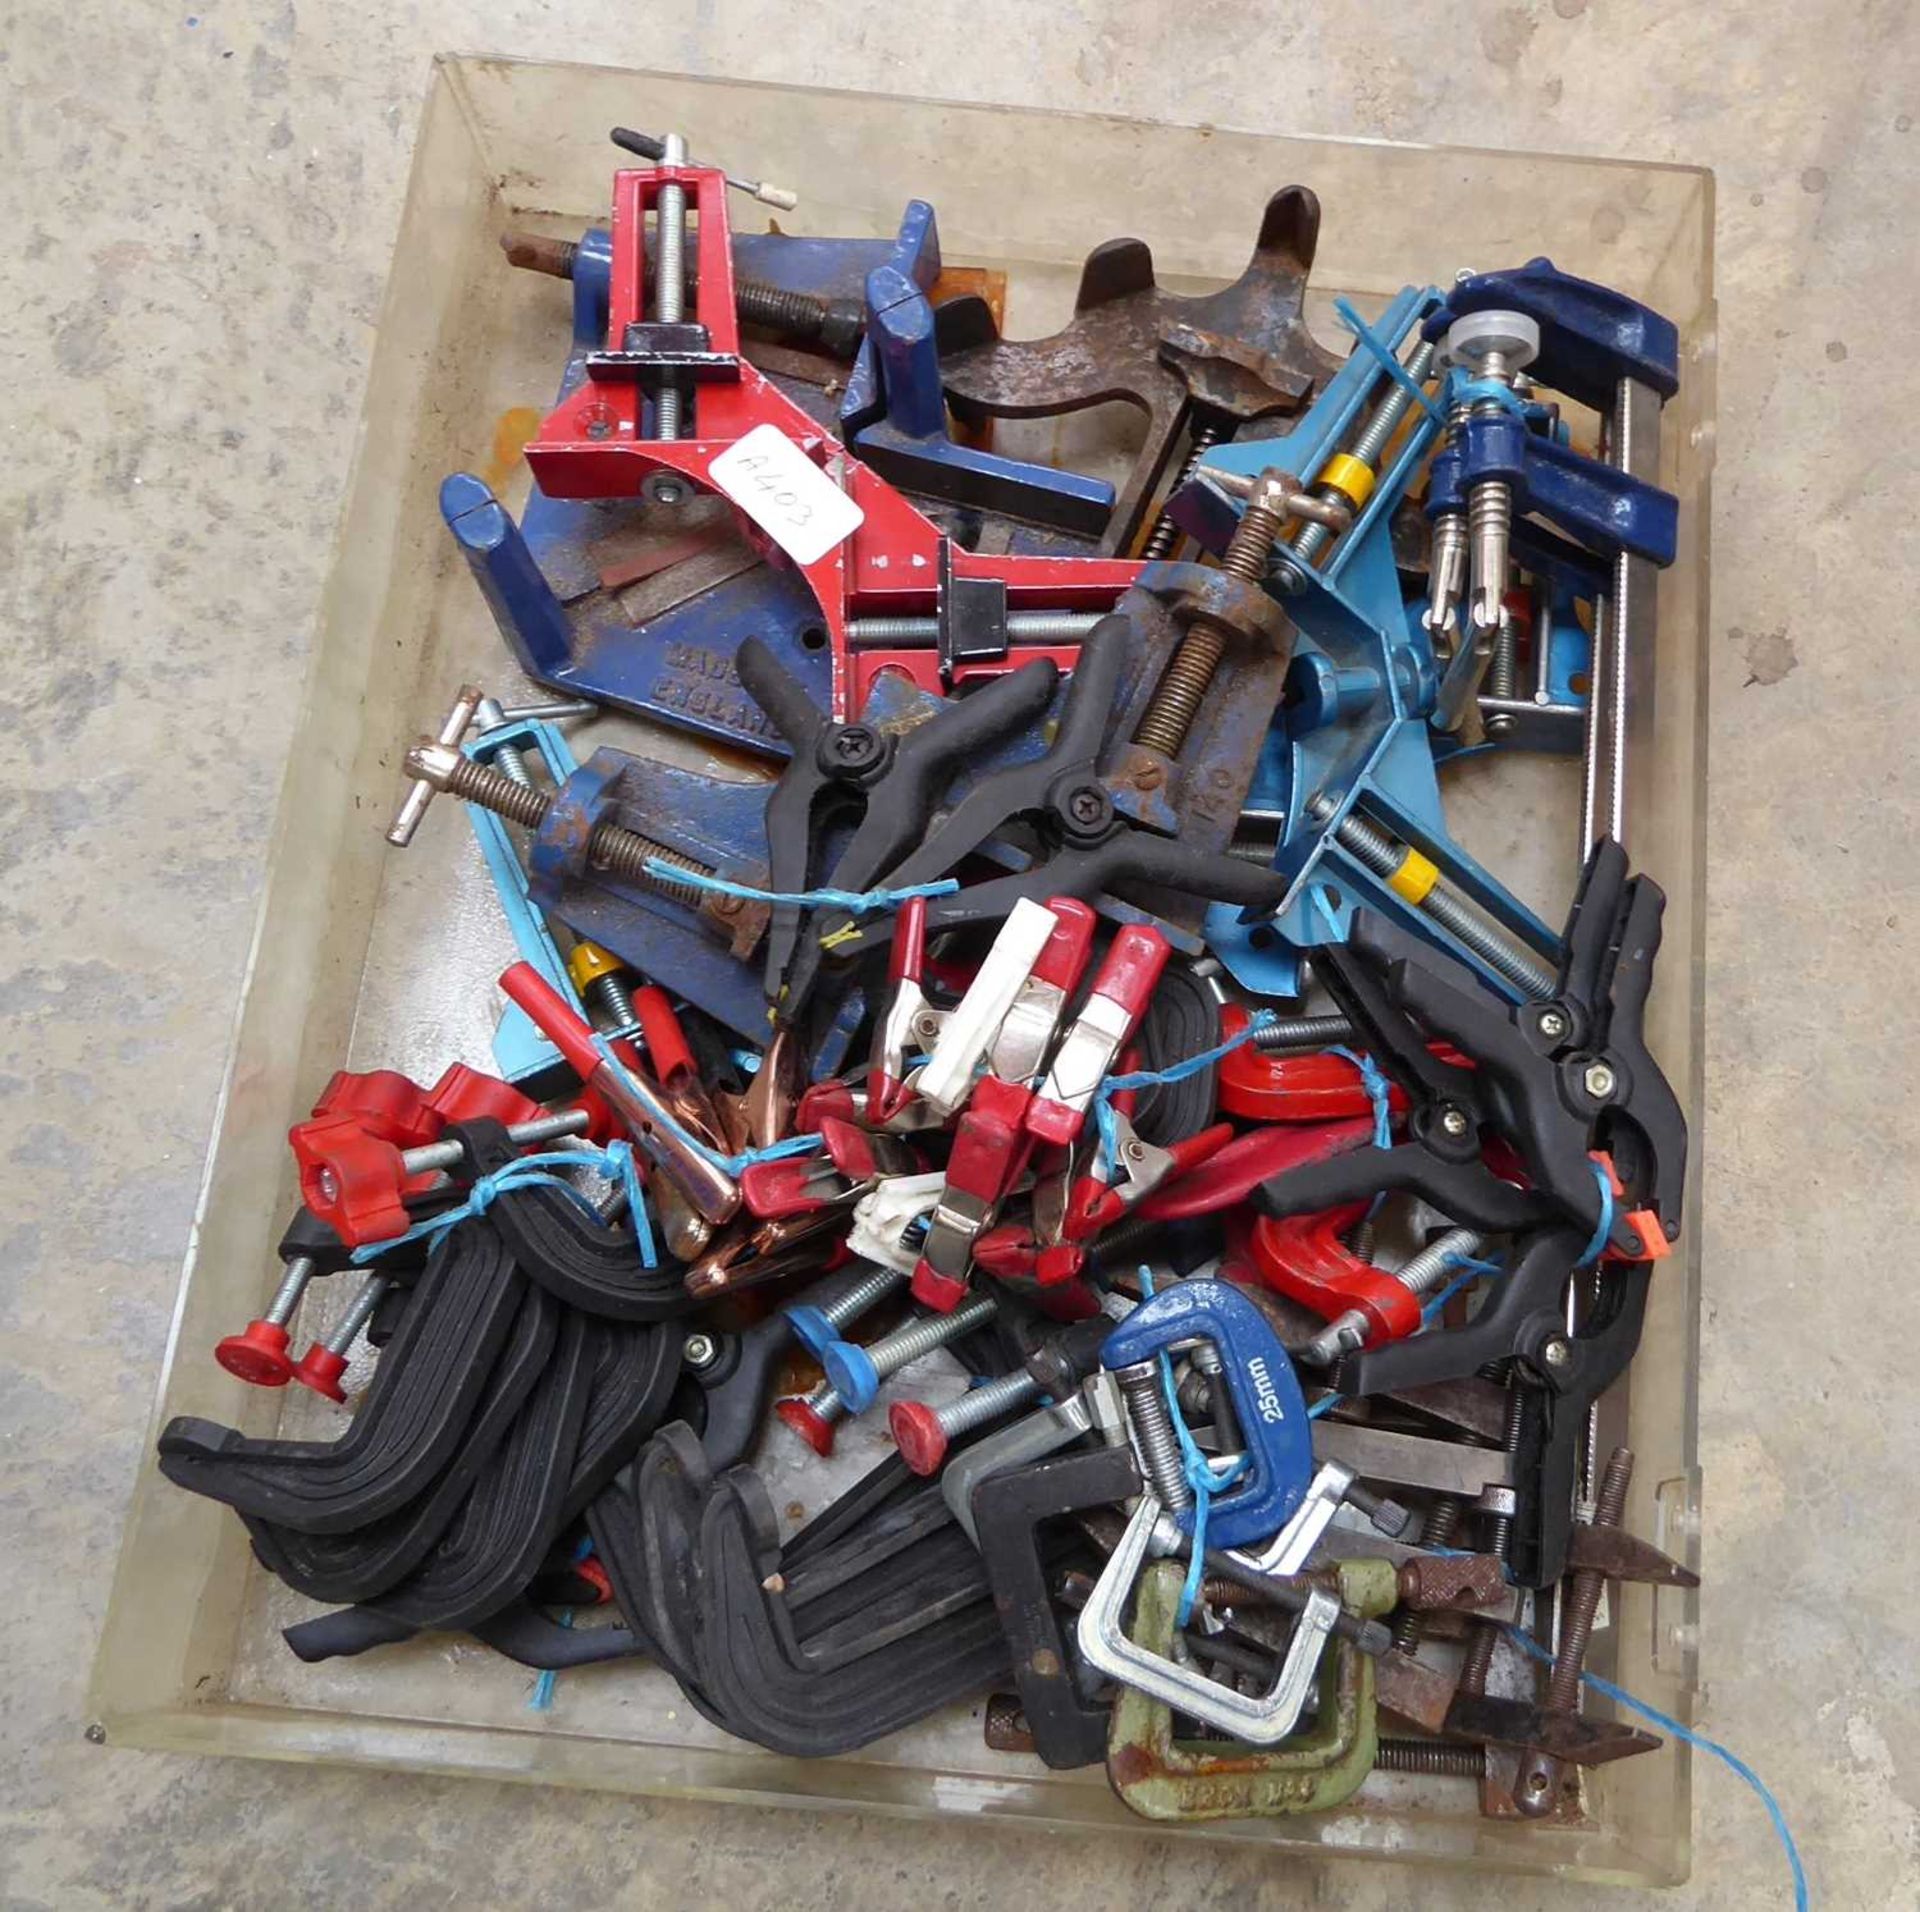 Crate containing a large qty of engineers clamps and vices